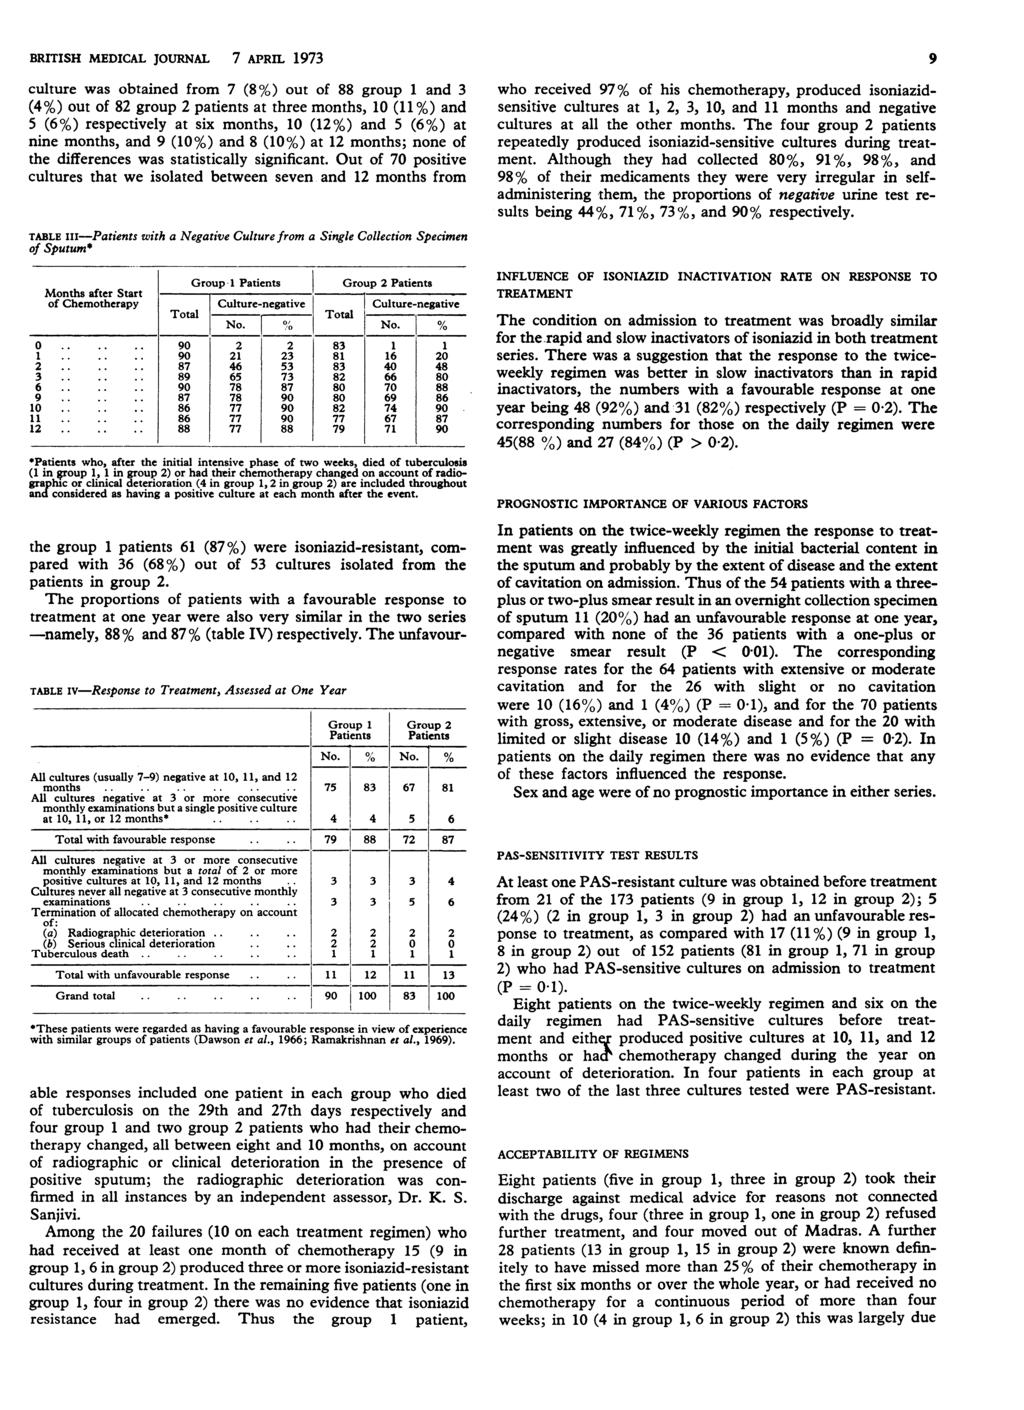 BRITISH MEDICAL JOURNAL 7 APRIL 1973 culture was obtained from 7 (8%) out of 88 group 1 and 3 (4%) out of 82 group 2 patients at three months, 10 (11 %) and 5 (6%) respectively at six months, 10